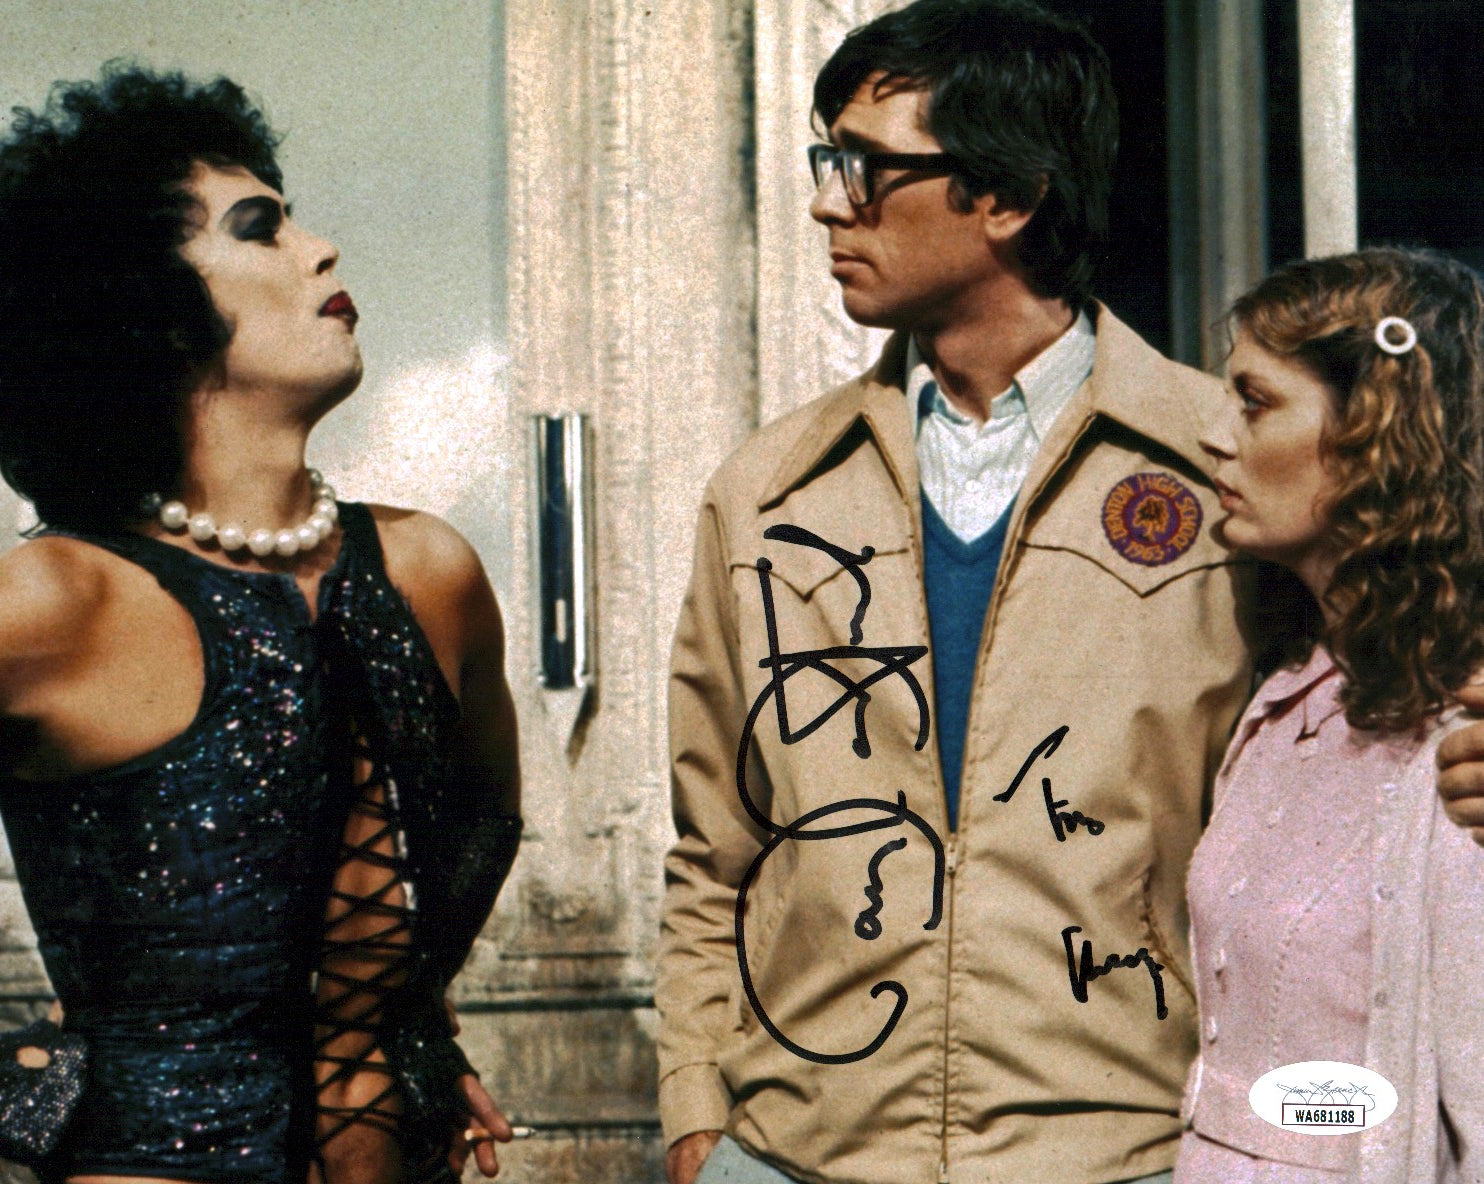 The Rocky Horror Picture Show RHPS 8x10 Cast Curry Bostwick Signed Photo JSA COA Certified Autograph GalaxyCon